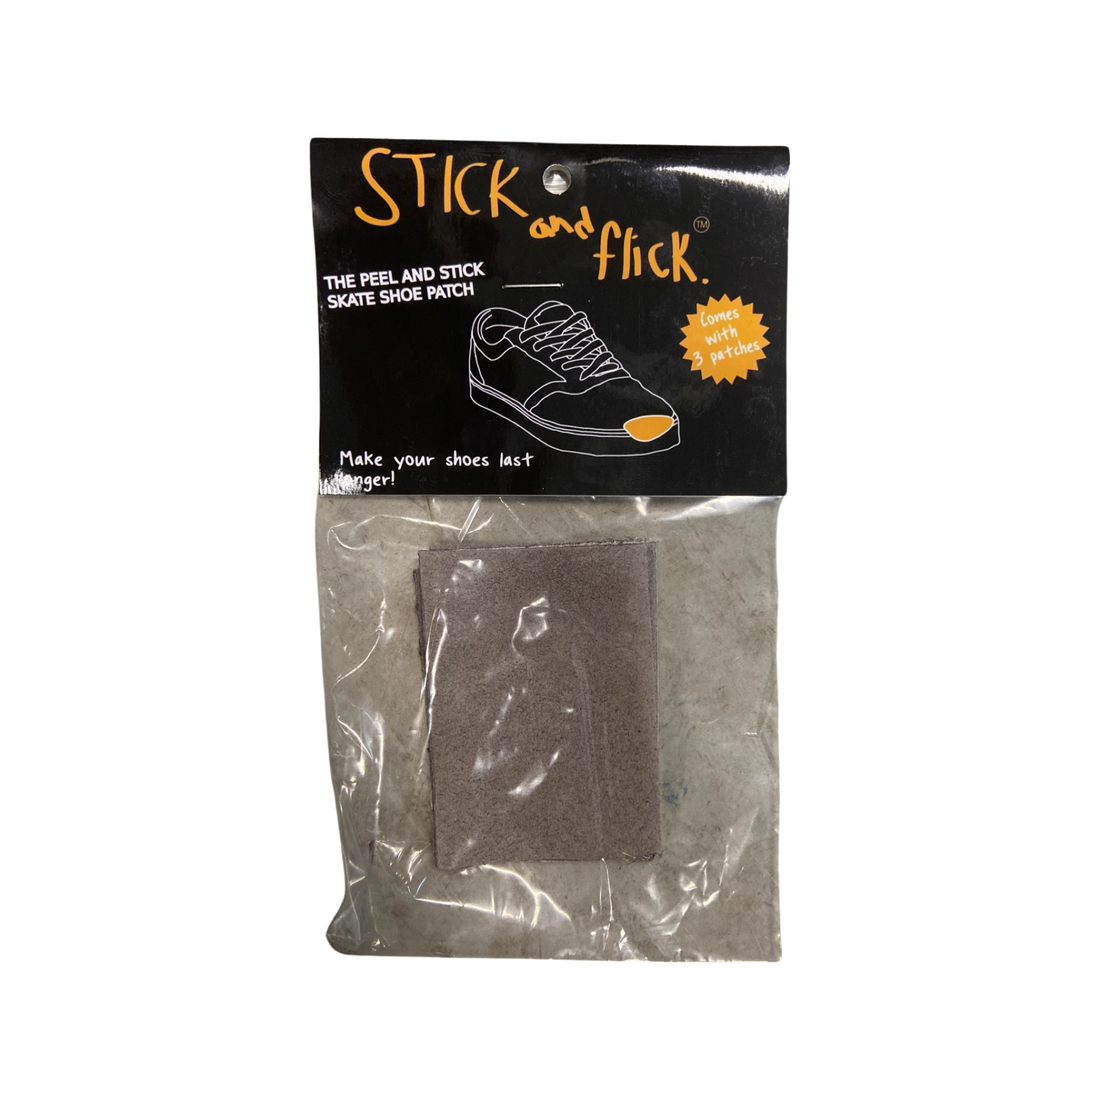 Stick & Flick Dark Grey Suede Peel And Stick Shoe Patch